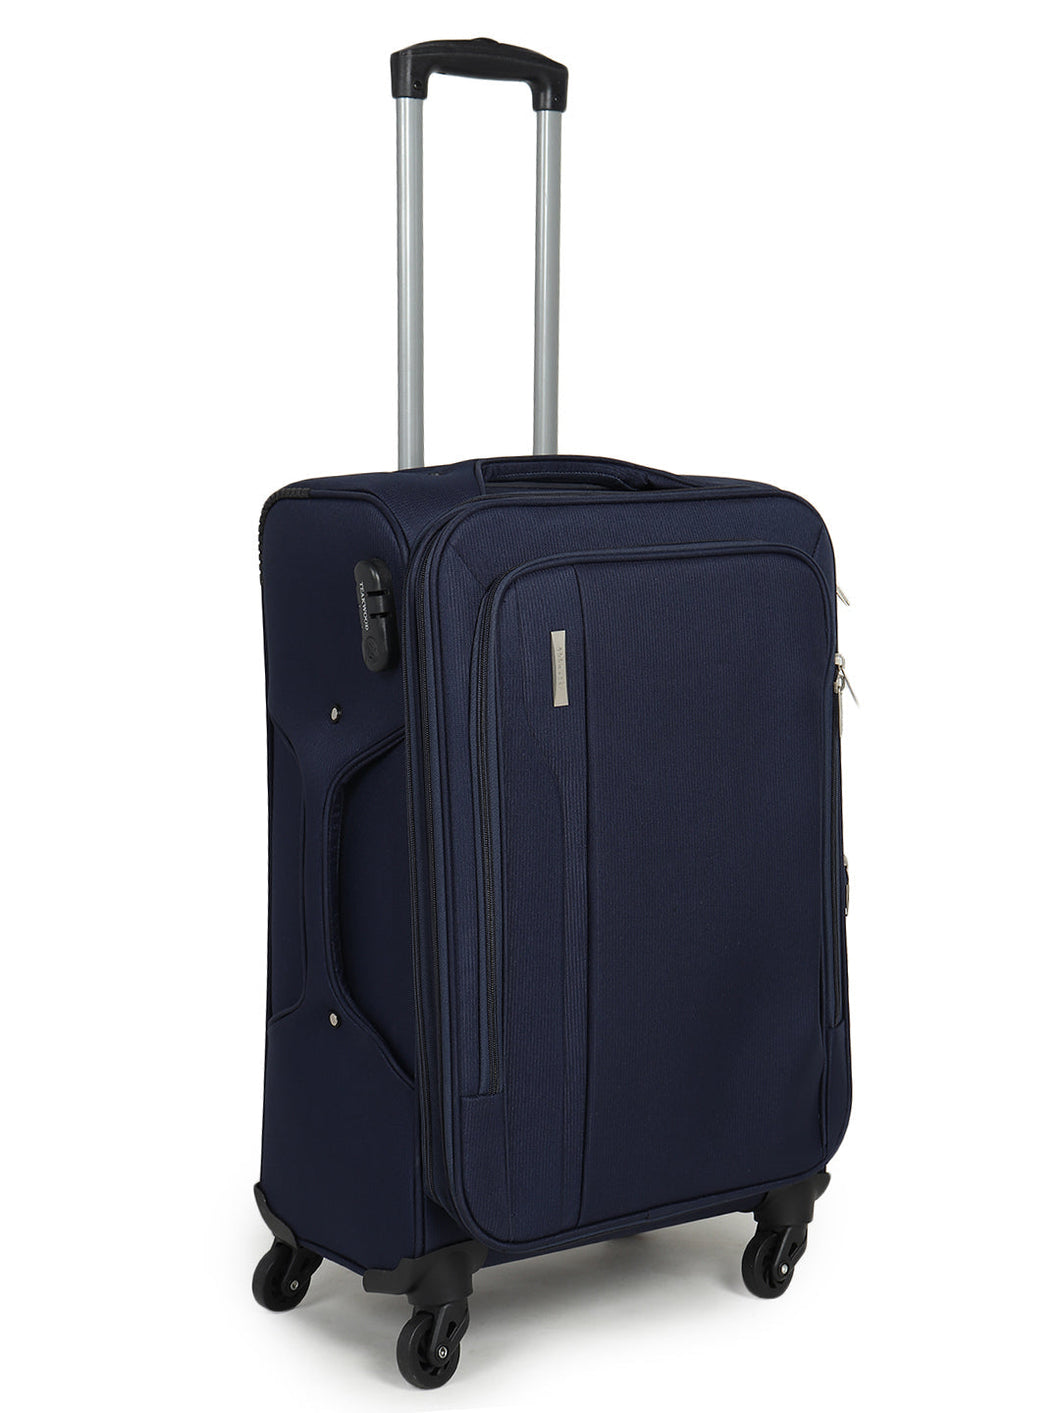 Unisex Blue Solid Sold-sided Large Trolley Suitcase (Large)